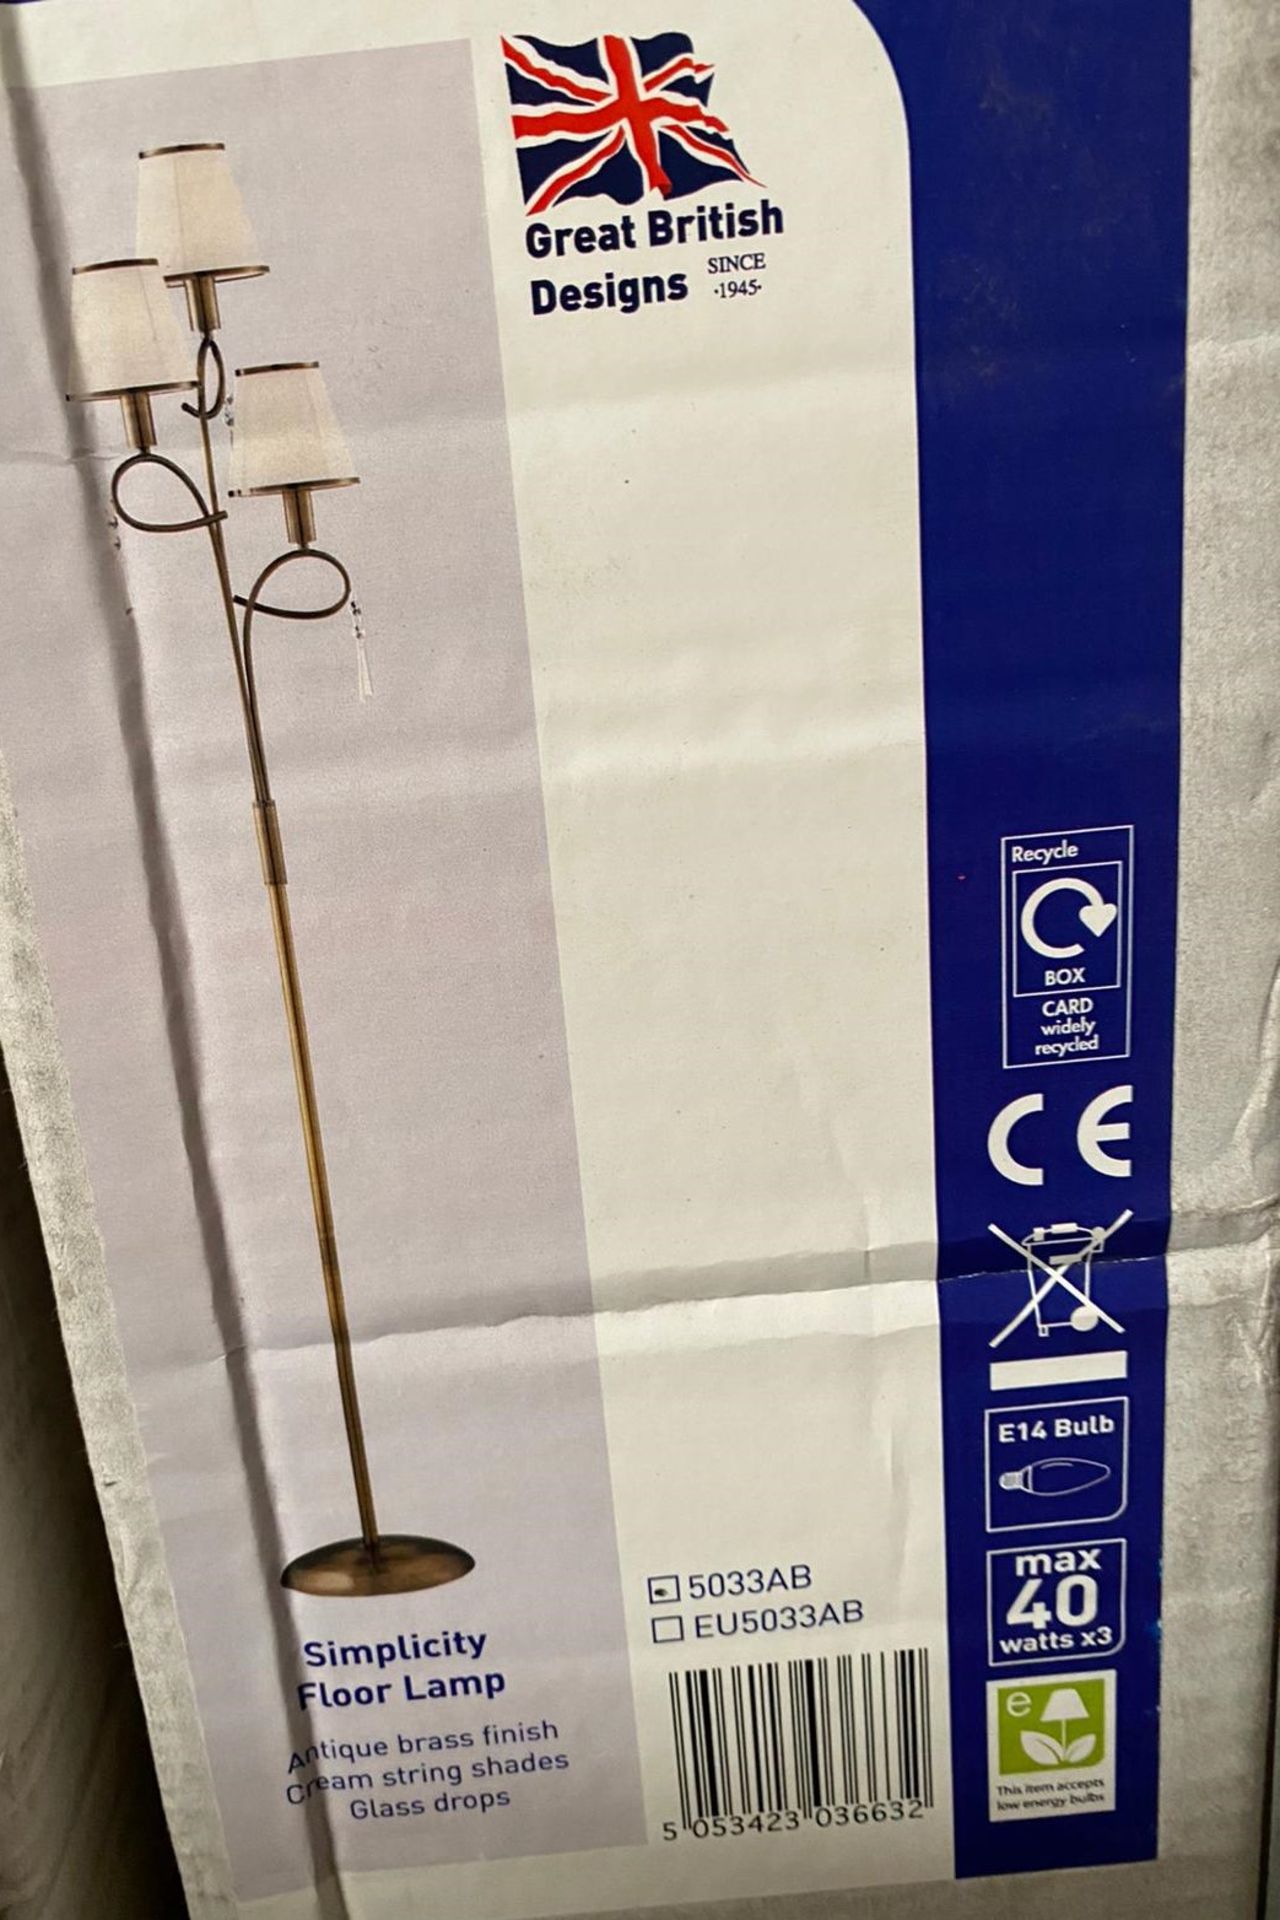 1 x Searchlight Simplicity Floor Lamp in Antique Brass - Ref: 5033AB - New and Boxed - RRP: £155.00